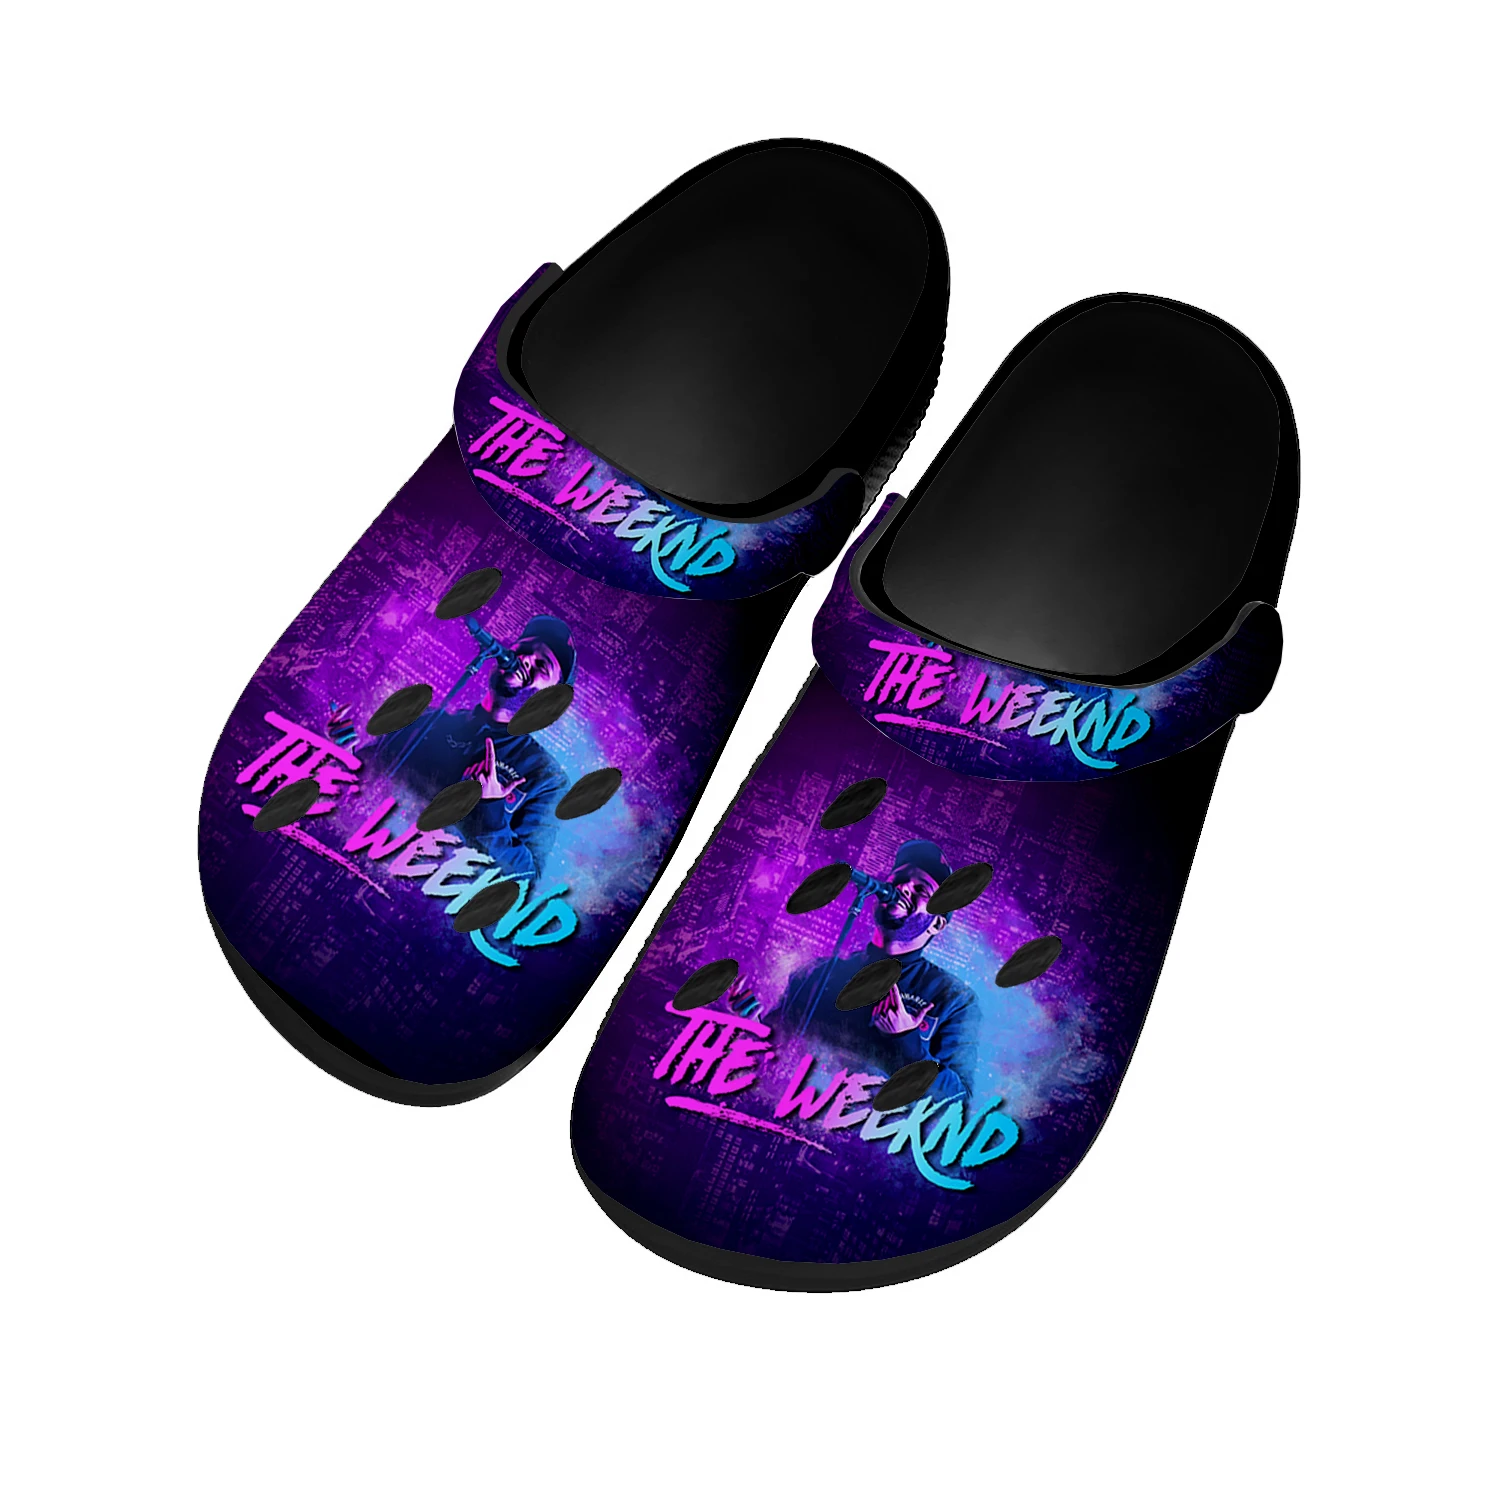 

The Weeknd Singer Pop Home Clogs Custom Water Shoes Mens Womens Teenager Shoe Garden Clog Breathable Beach Hole Slippers Black